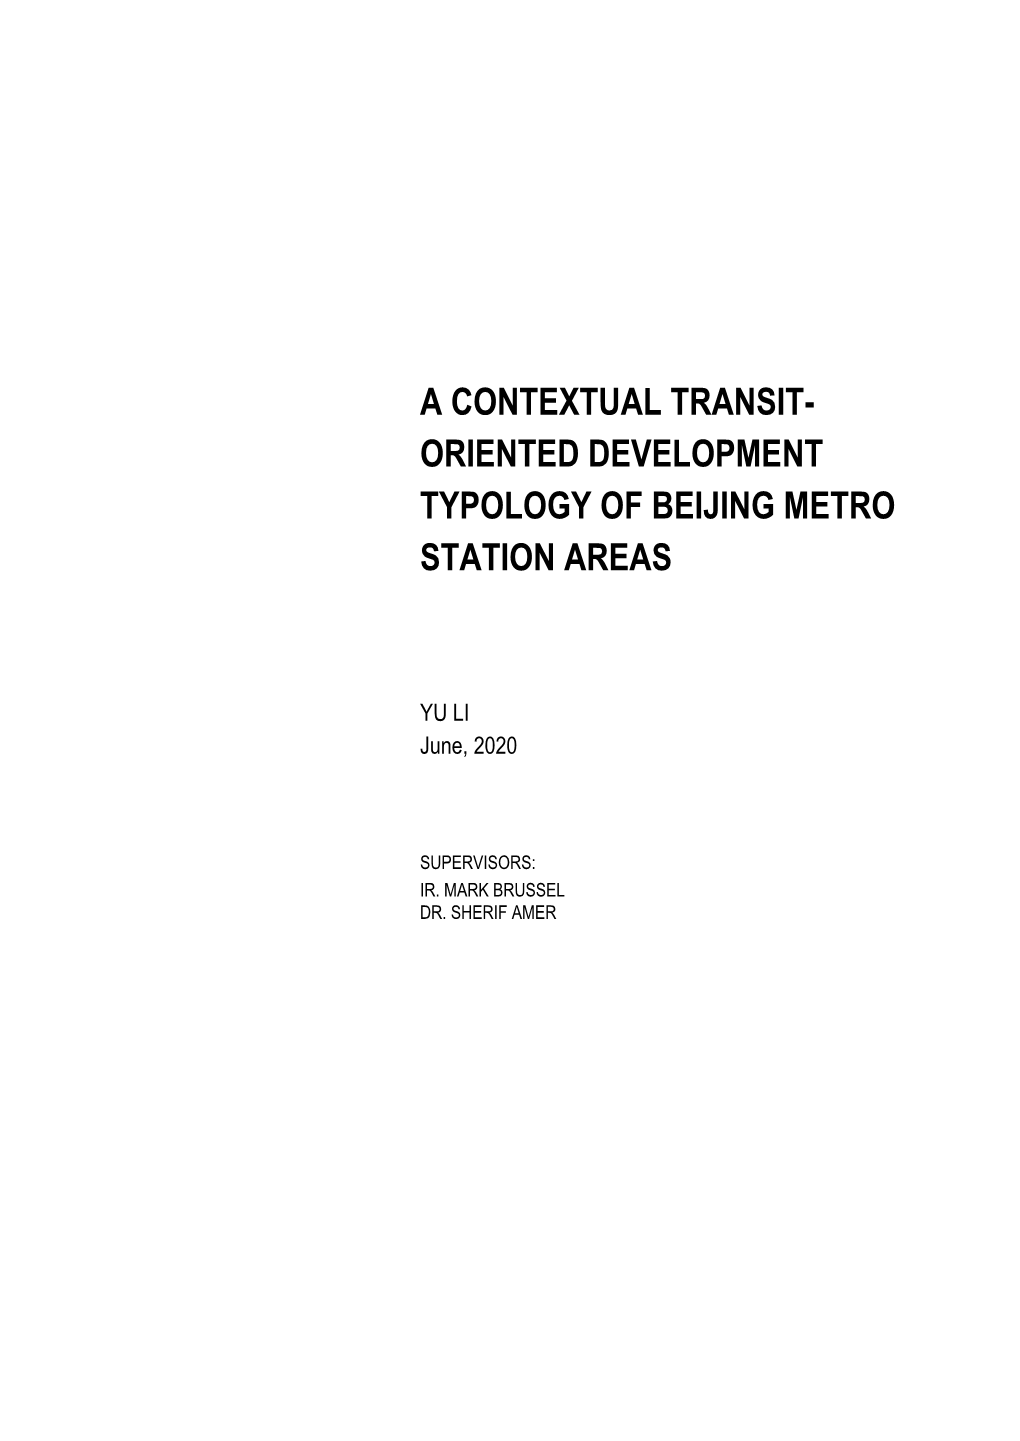 A Contextual Transit- Oriented Development Typology of Beijing Metro Station Areas